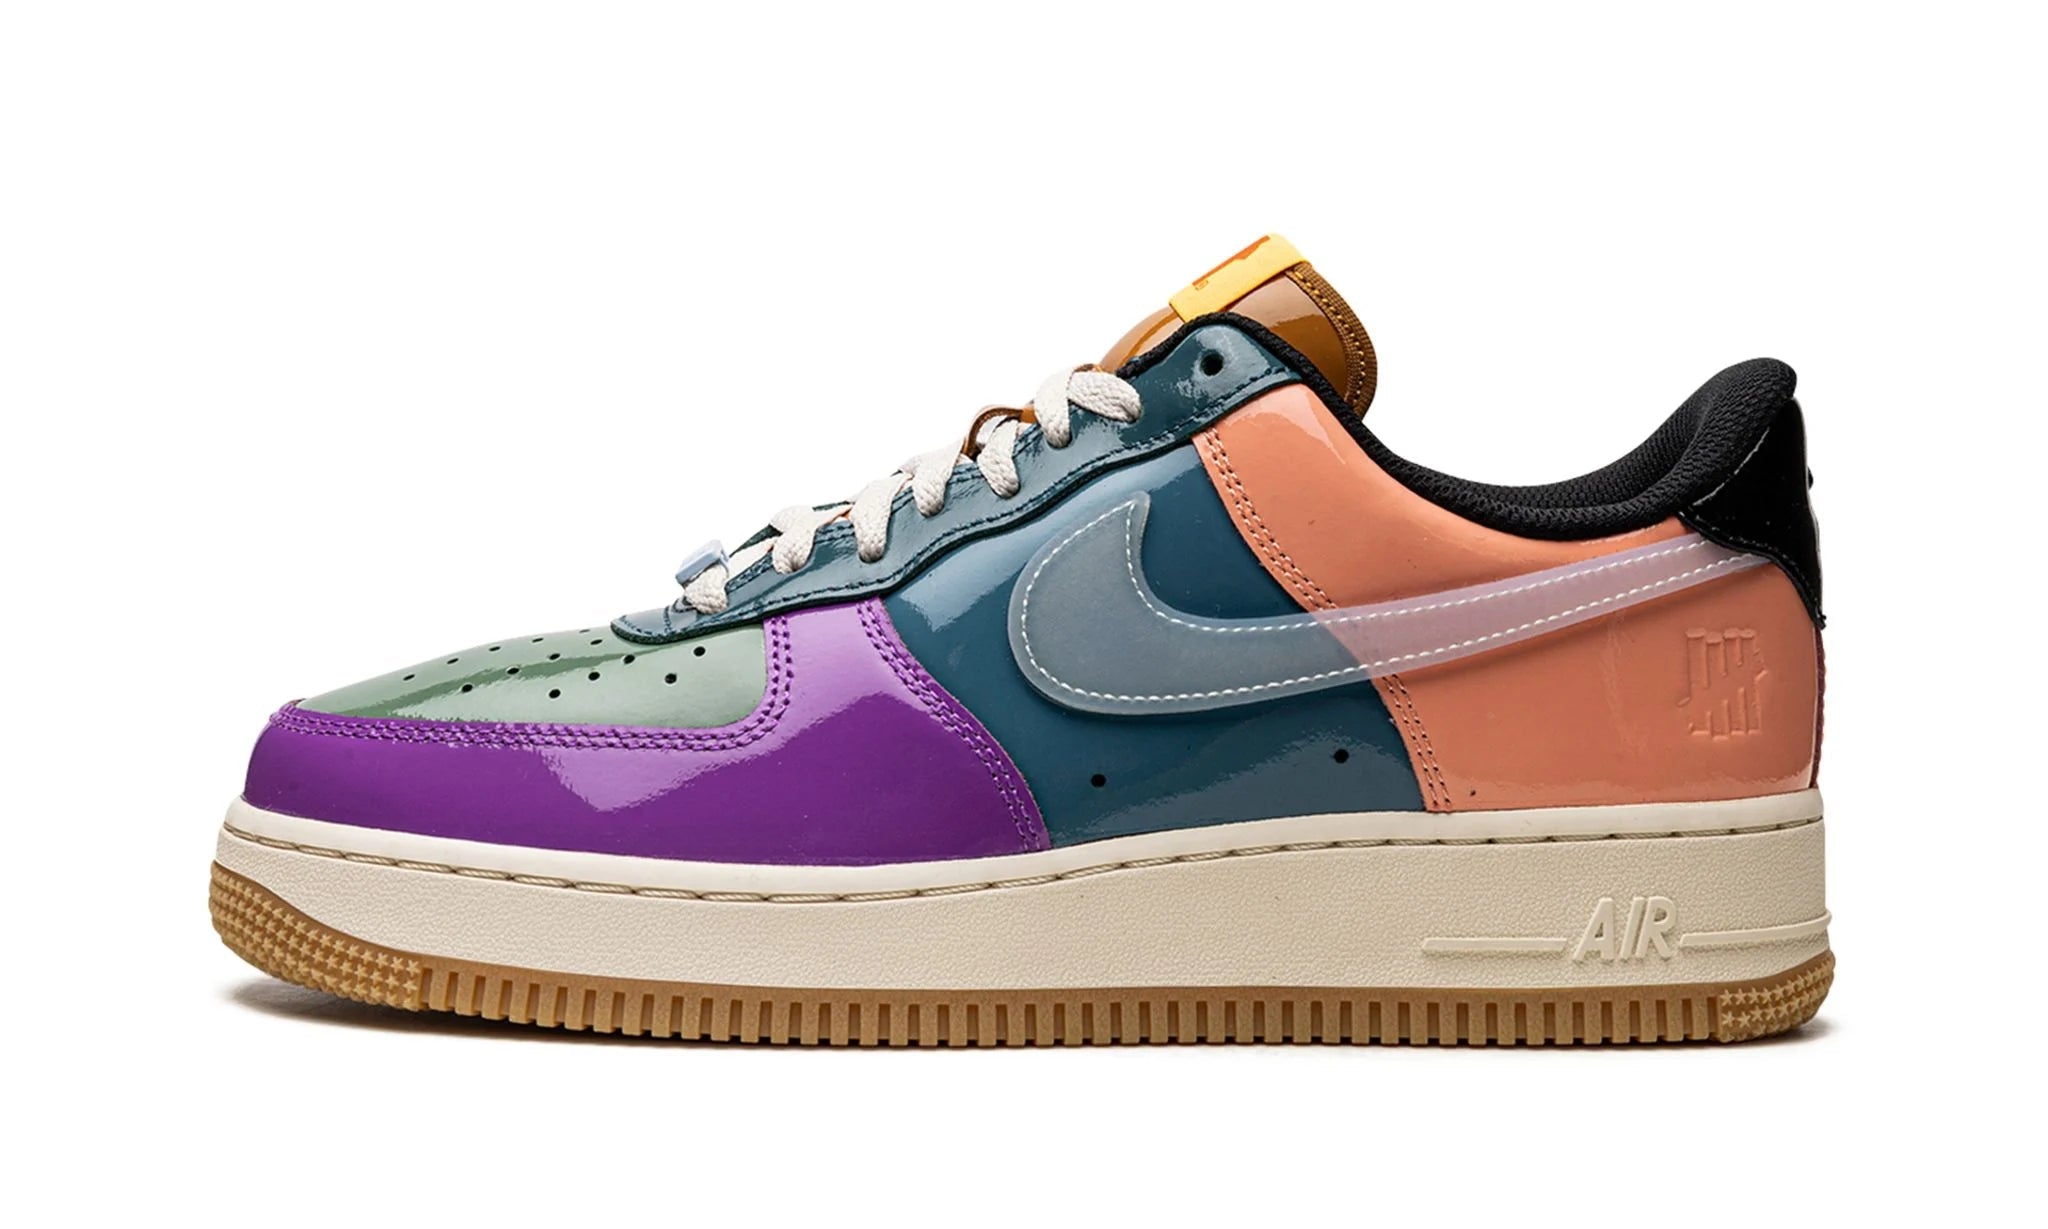 Nike Air Force 1 Low SP Undefeated Multi-Patent Wild Berry - Air Force 1 - Pirri